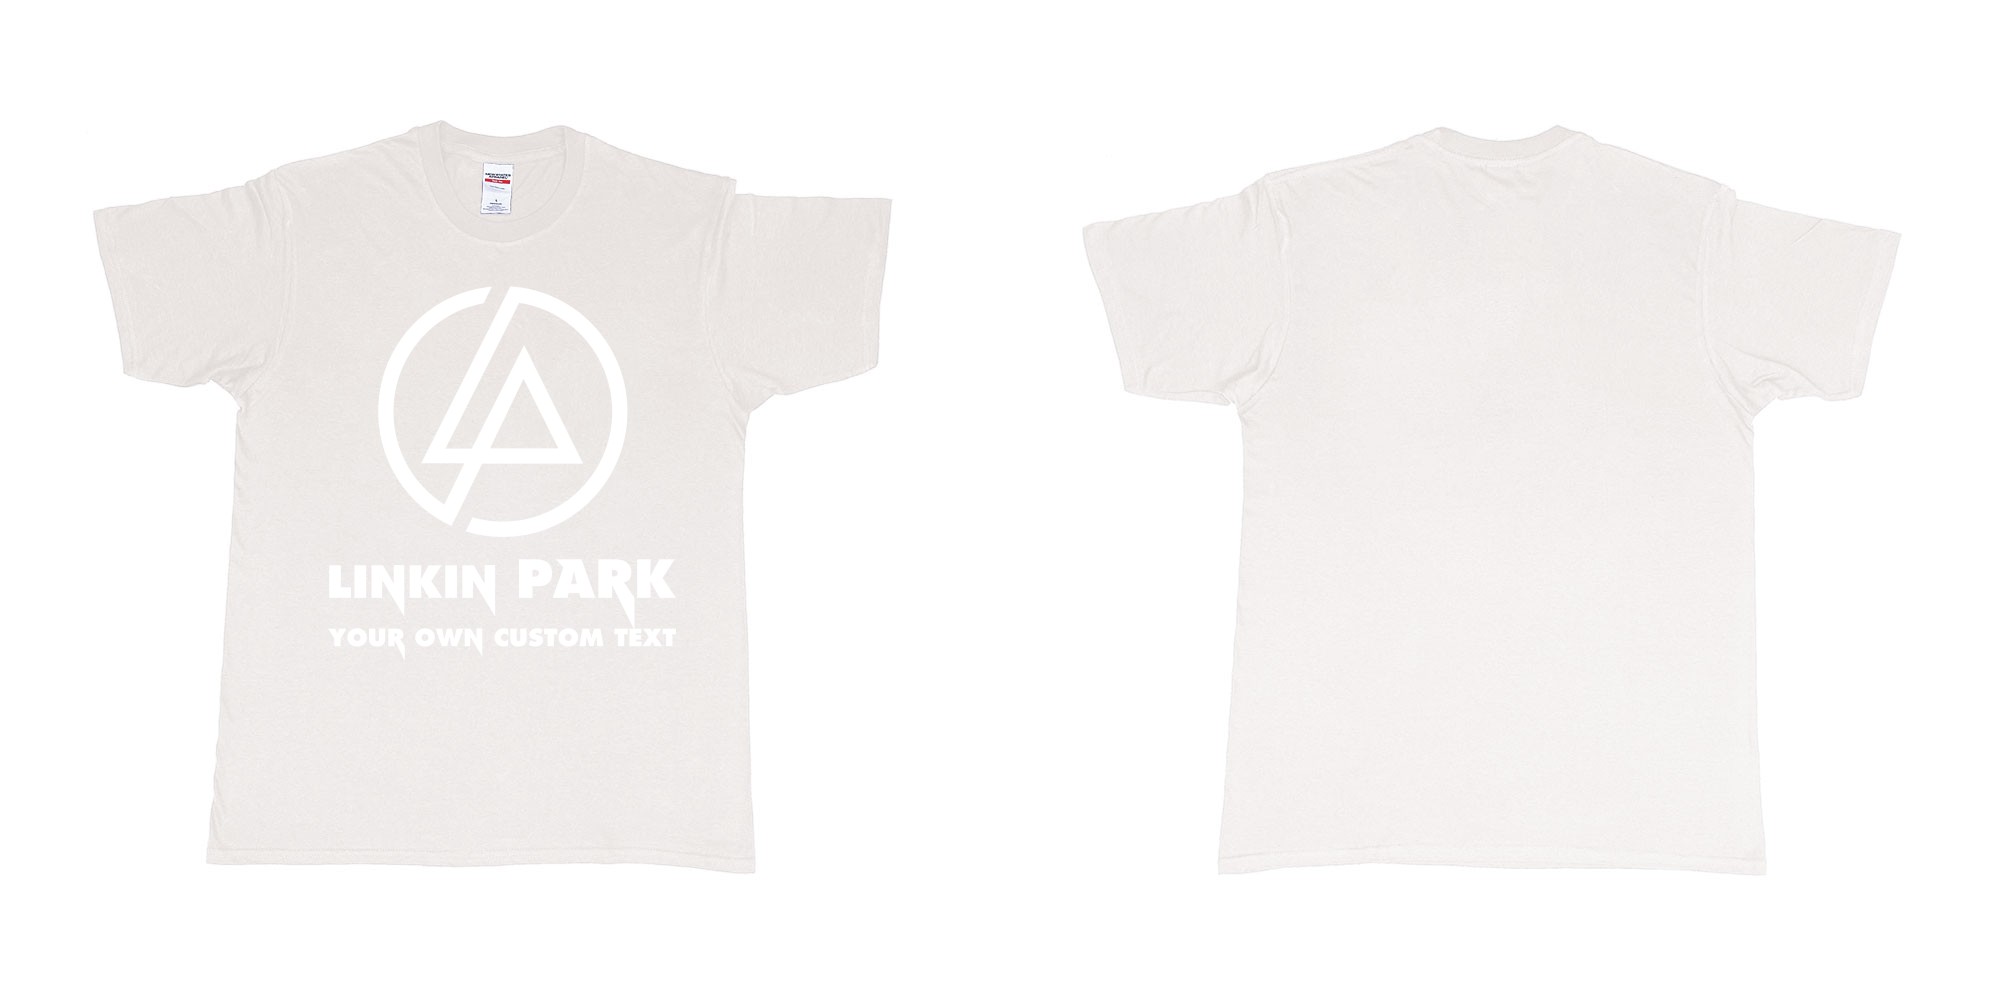 Custom tshirt design linkin park custom tshirt printing bali in fabric color white choice your own text made in Bali by The Pirate Way